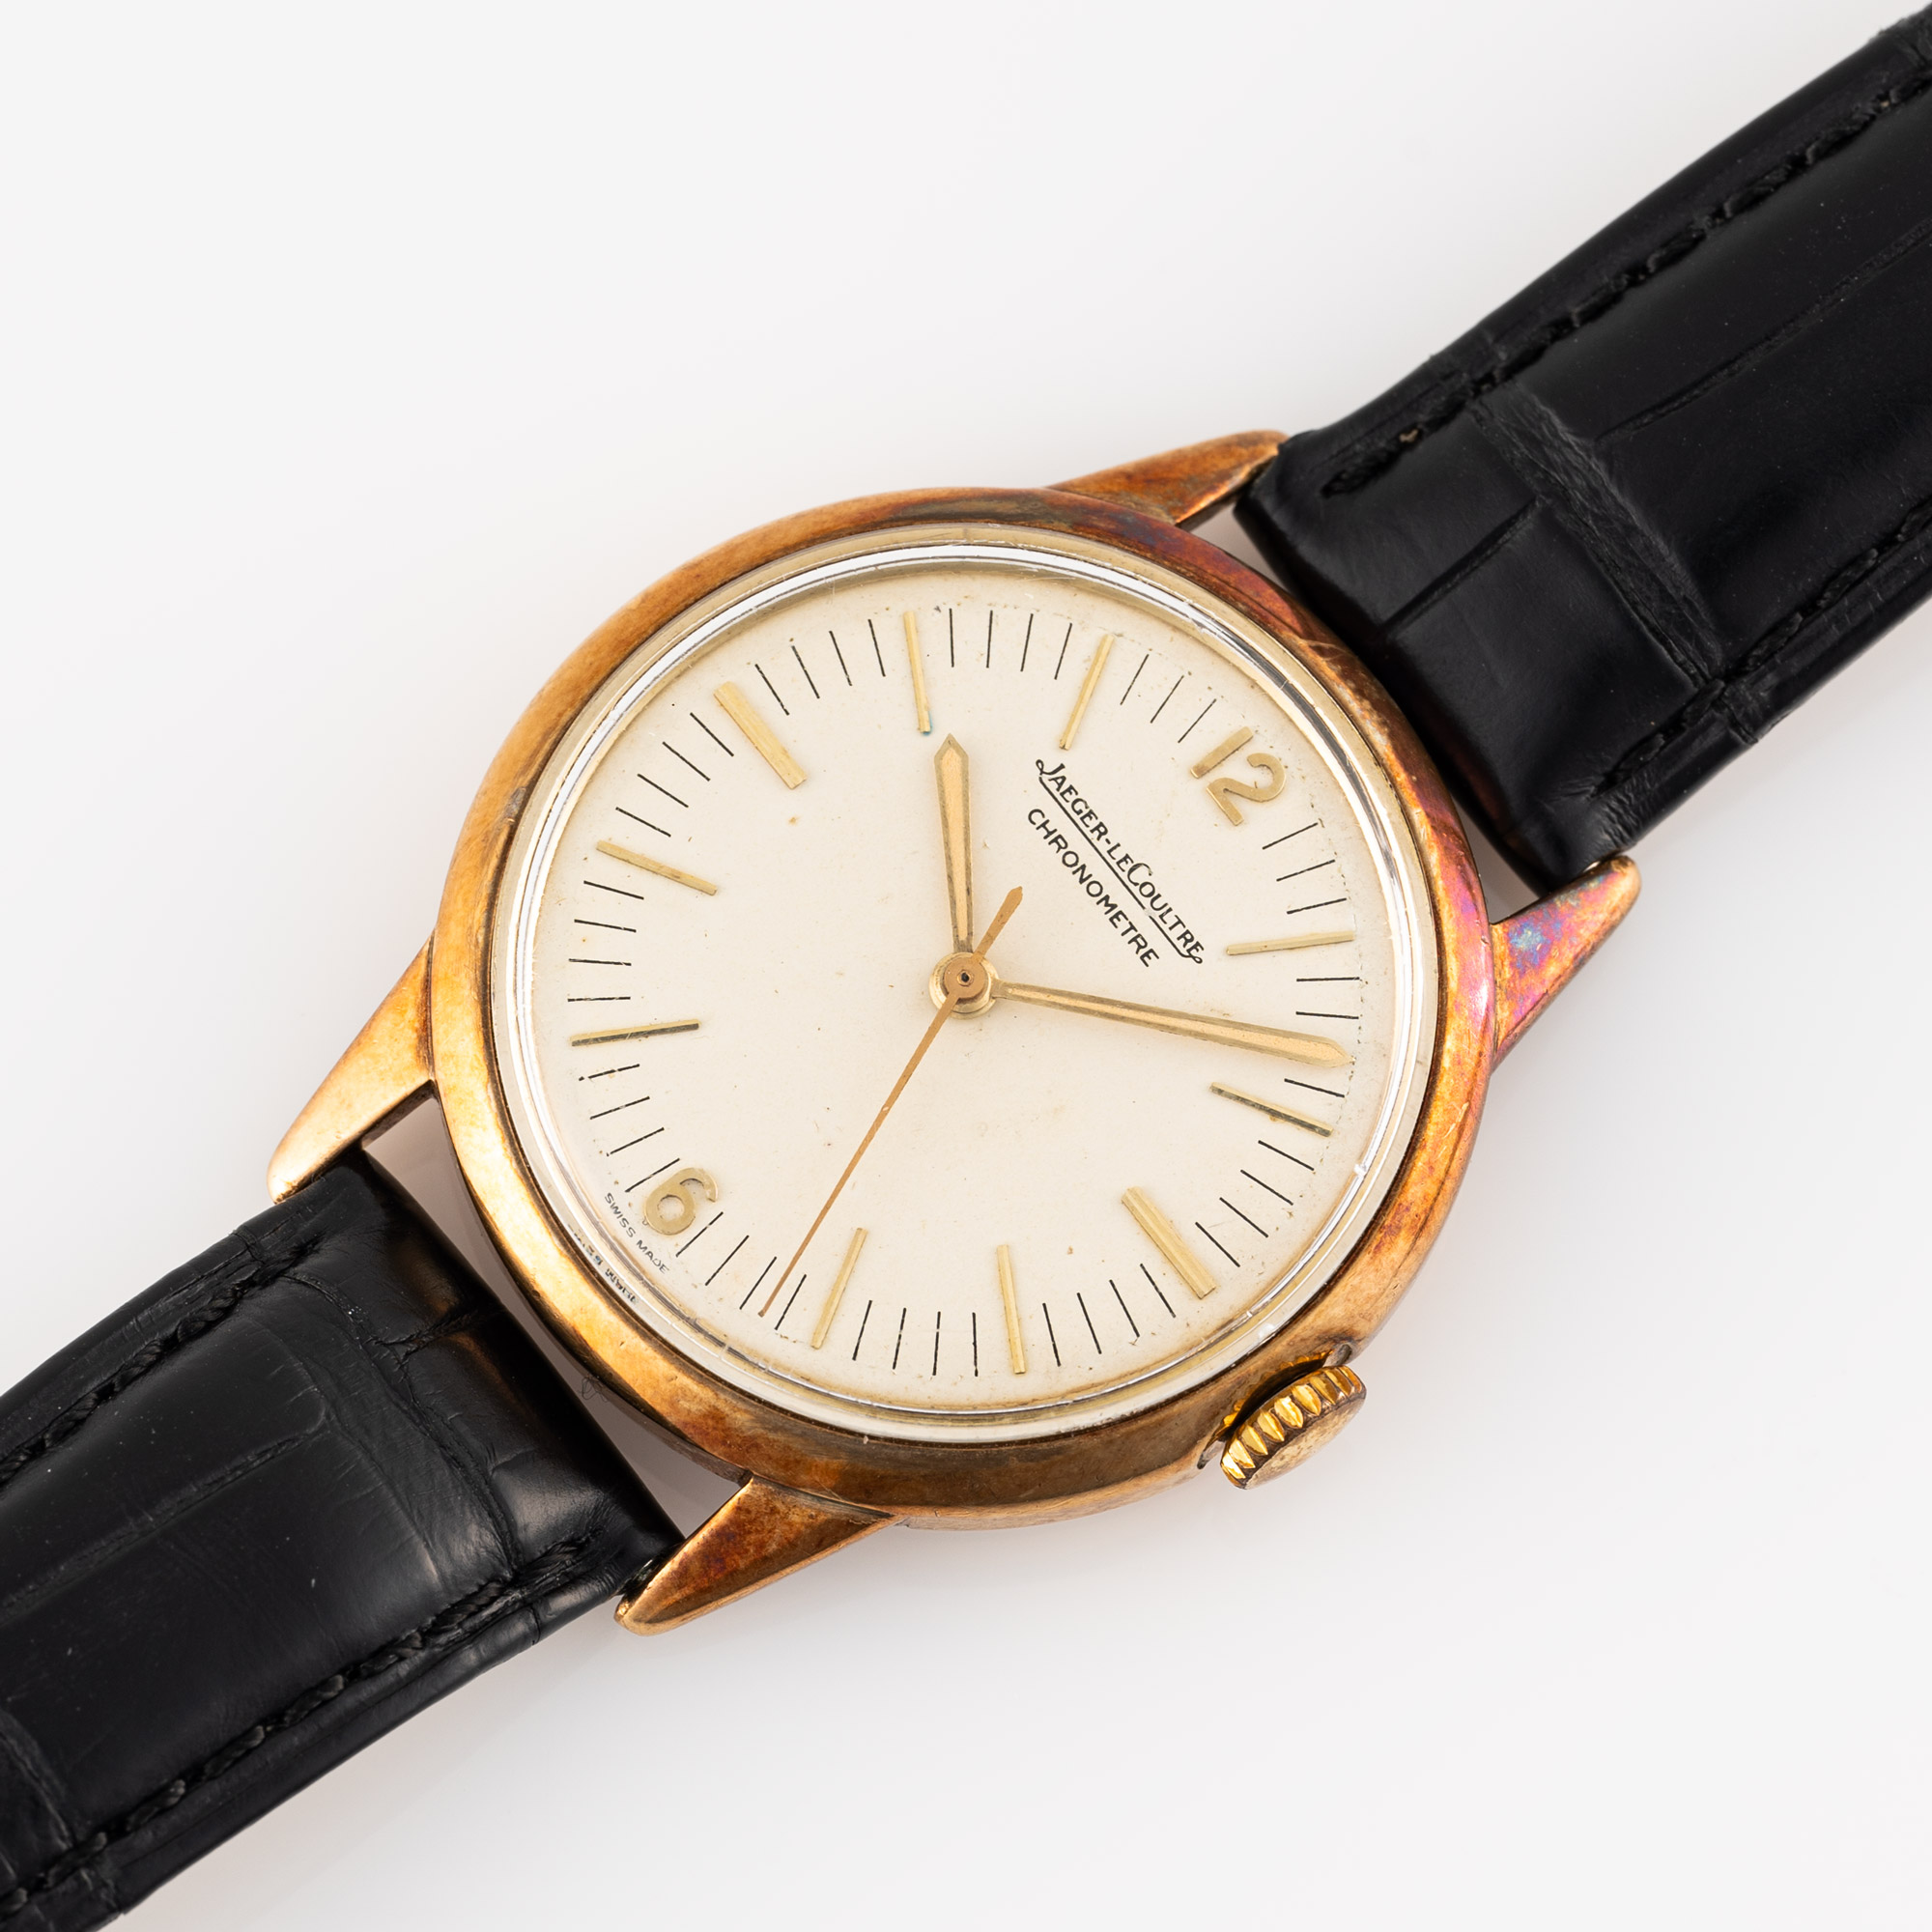 A RARE GENTLEMAN'S SIZE 9CT SOLID GOLD JAEGER LECOULTRE GEOPHYSIC CHRONOMETER WRIST WATCH CIRCA - Image 5 of 9